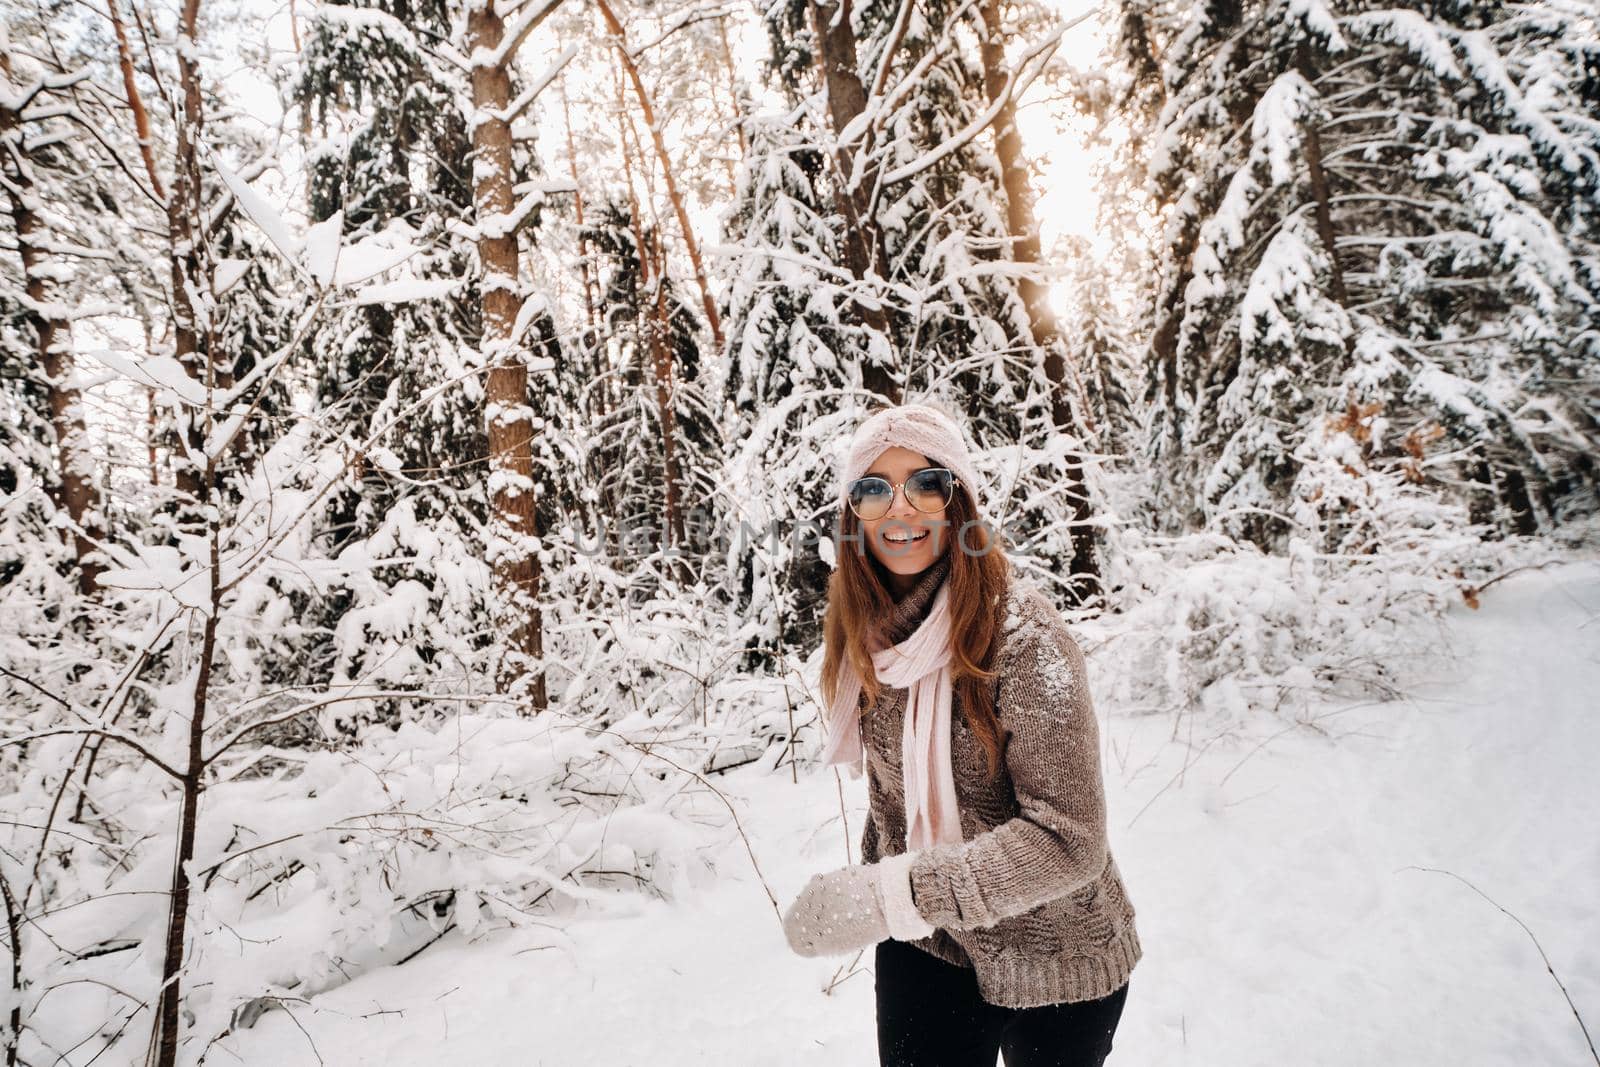 A girl in a sweater and glasses walks in the snow-covered forest in winter.